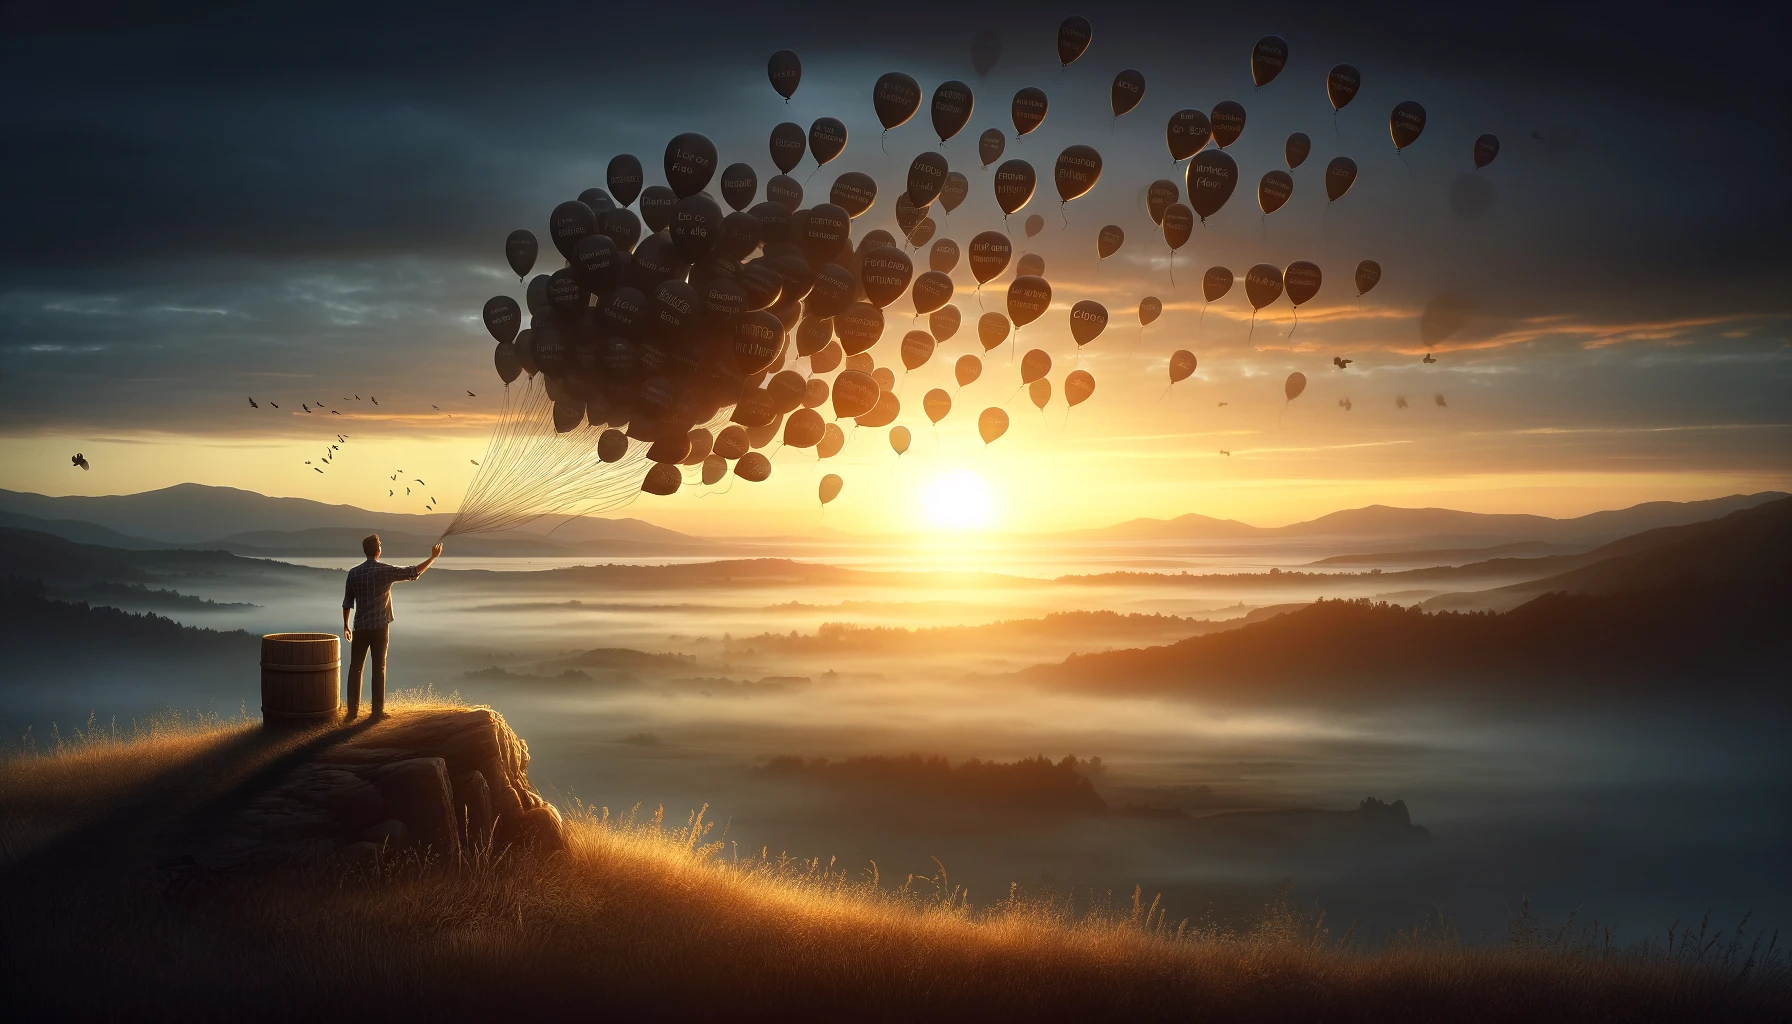 A 16_9 widescreen image that captures the essence of 'Letting Go of the Past'. The scene depicts a serene, open landscape at dawn, symbolizing new beg